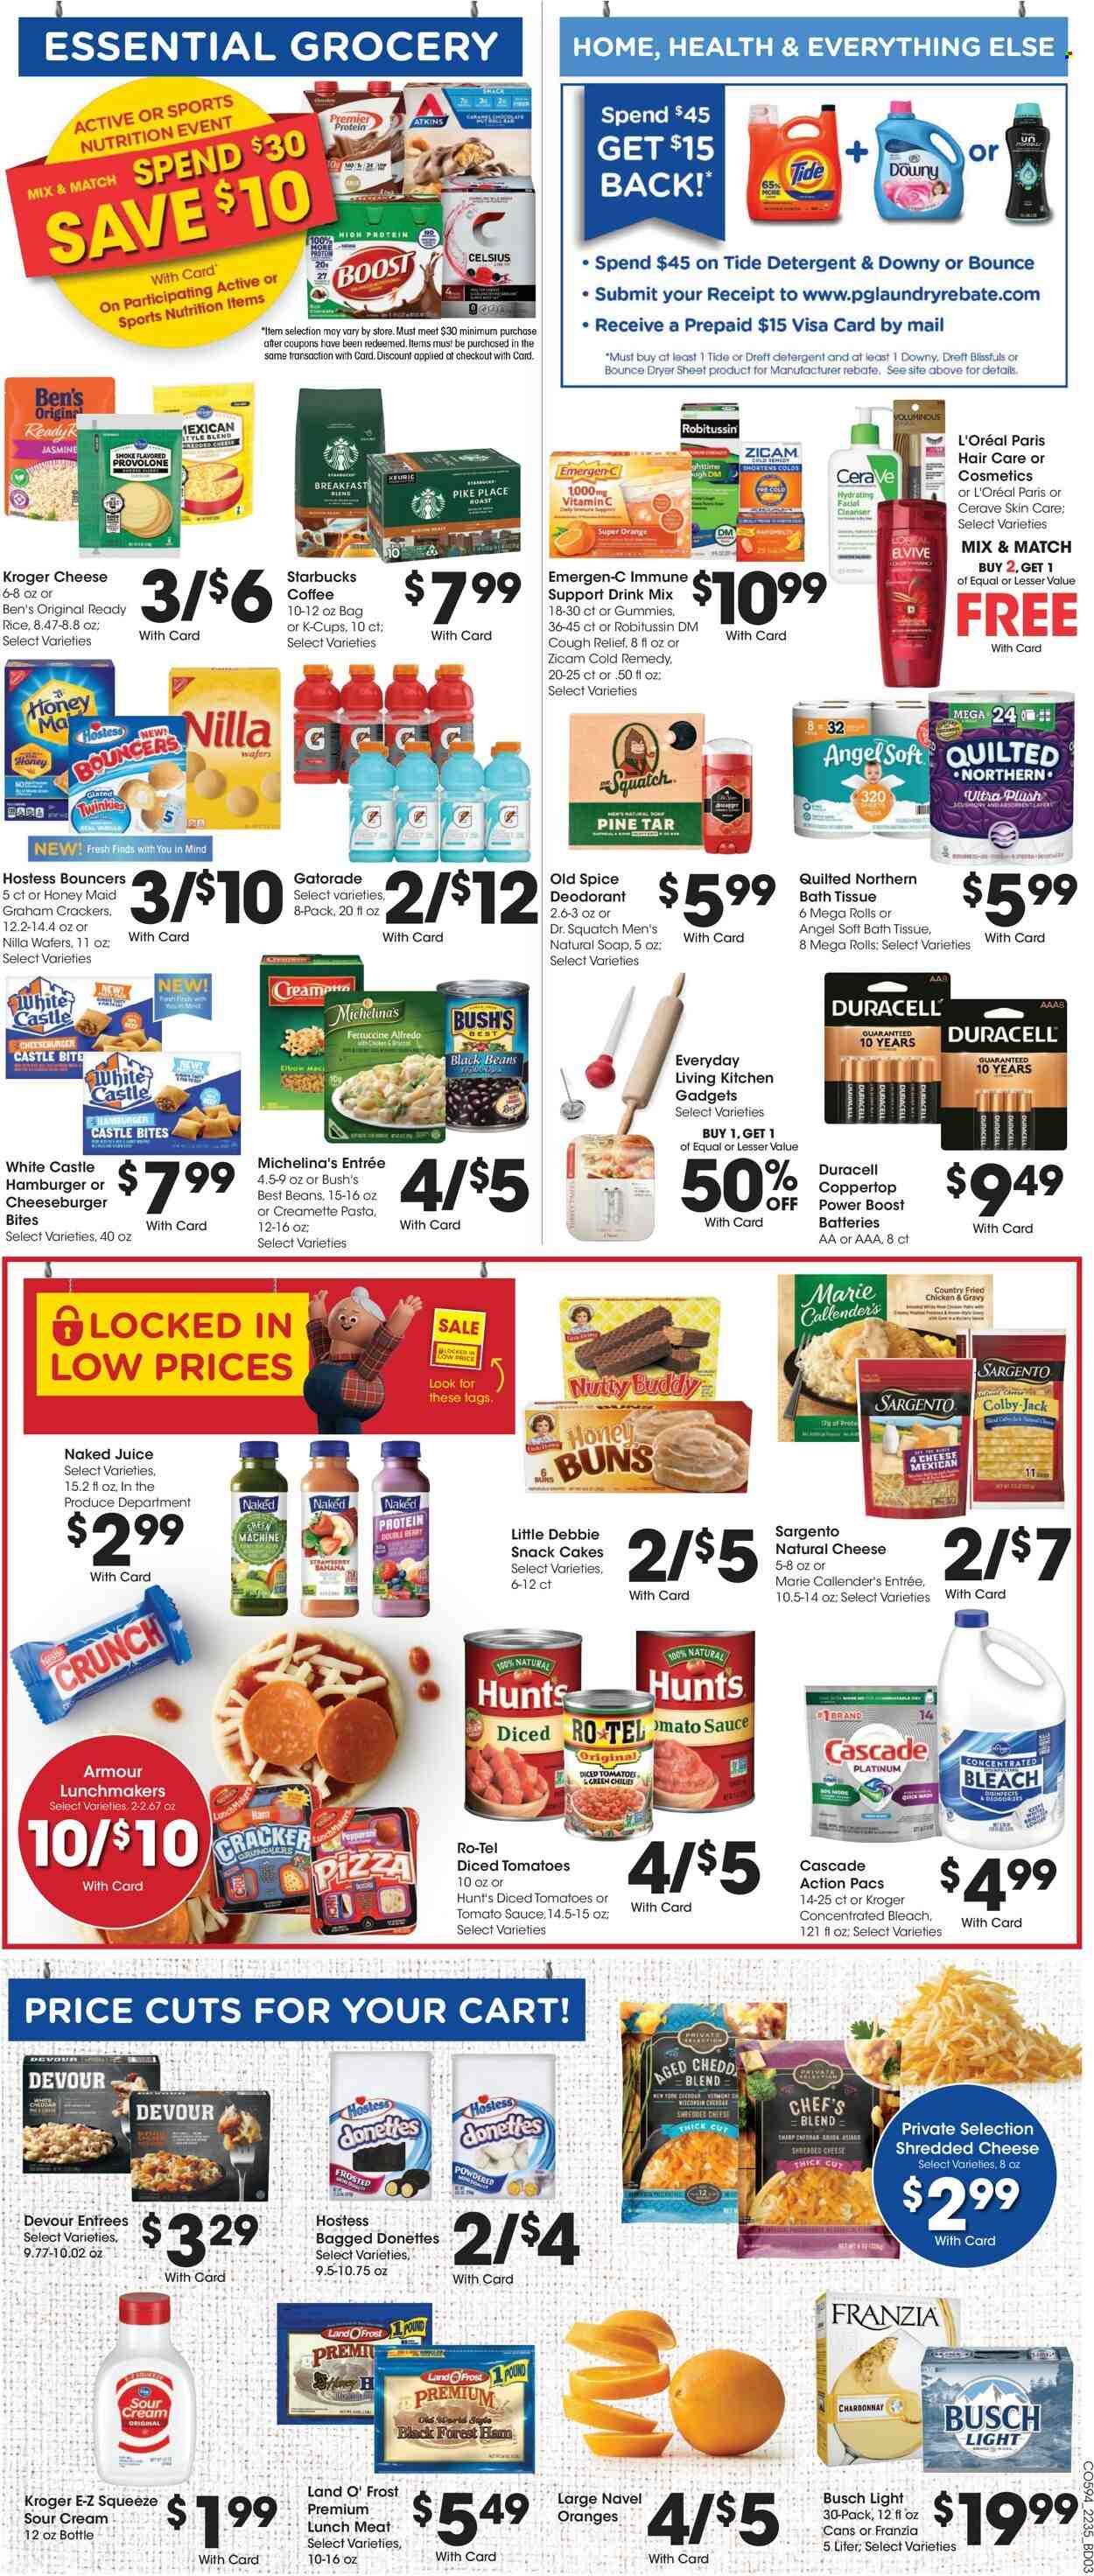 thumbnail - Kroger Flyer - 09/28/2022 - 10/04/2022 - Sales products - Bestå, cake, buns, oranges, pizza, hamburger, pasta, cheeseburger, fried chicken, Marie Callender's, ham, lunch meat, asiago, Colby cheese, gouda, shredded cheese, Provolone, Sargento, sour cream, Devour, graham crackers, Nestlé, wafers, snack, crackers, black beans, tomato sauce, diced tomatoes, Honey Maid, rice, Creamette, spice, juice, Gatorade, Boost, coffee, Starbucks, coffee capsules, K-Cups, breakfast blend, white wine, Chardonnay, beer, Busch, Castle, bath tissue, Quilted Northern, detergent, bleach, Cascade, Tide, Bounce, Old Spice, soap, CeraVe, cleanser, L’Oréal, anti-perspirant, deodorant, battery, Duracell, cart, Robitussin, vitamin c, Emergen-C, navel oranges. Page 6.